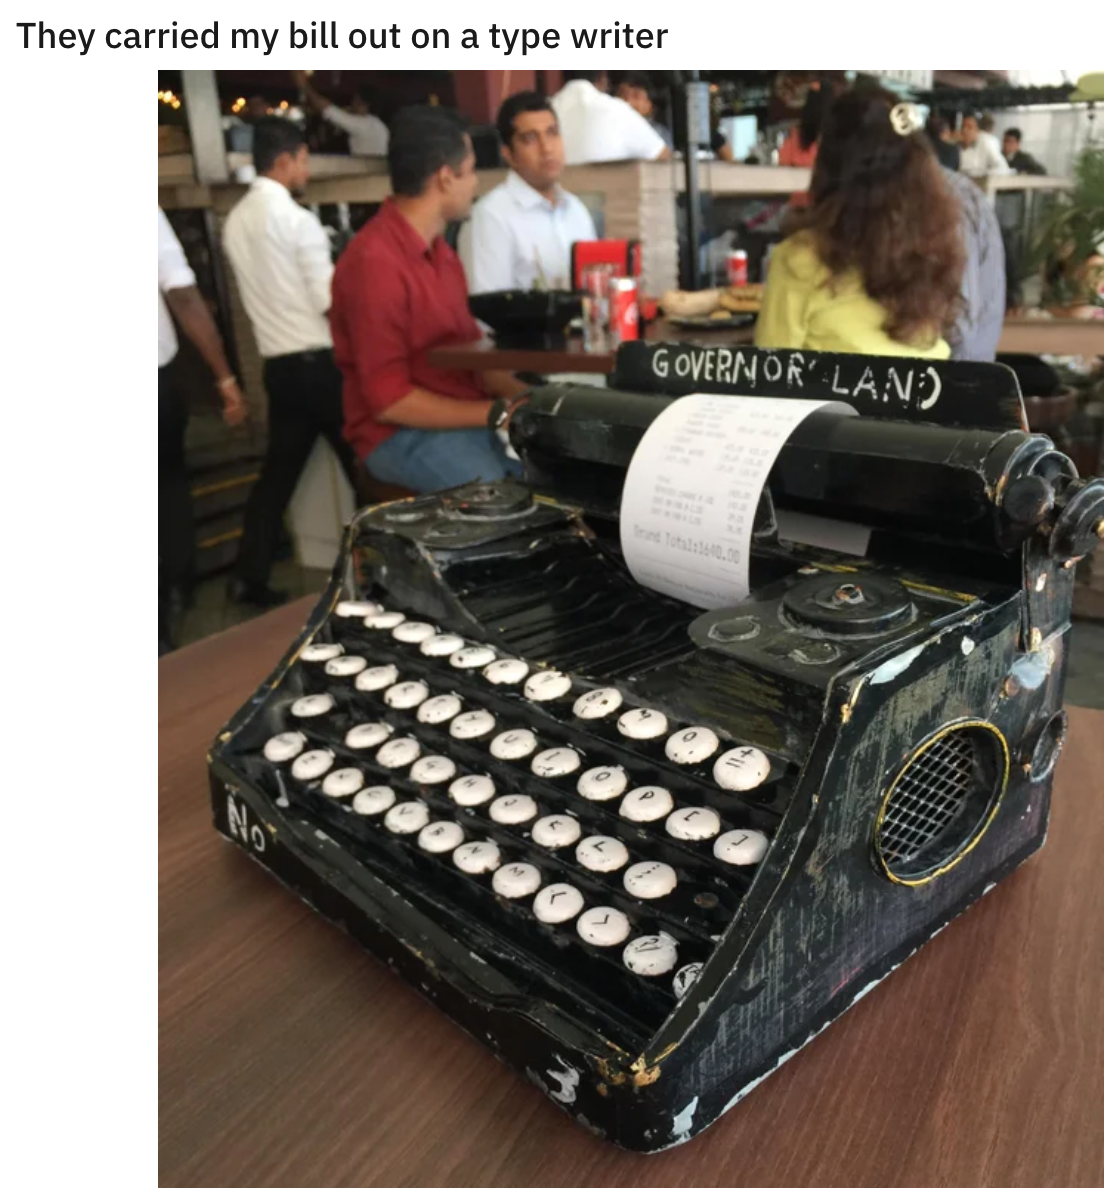 funny food pics - They carried my bill out on a type writer